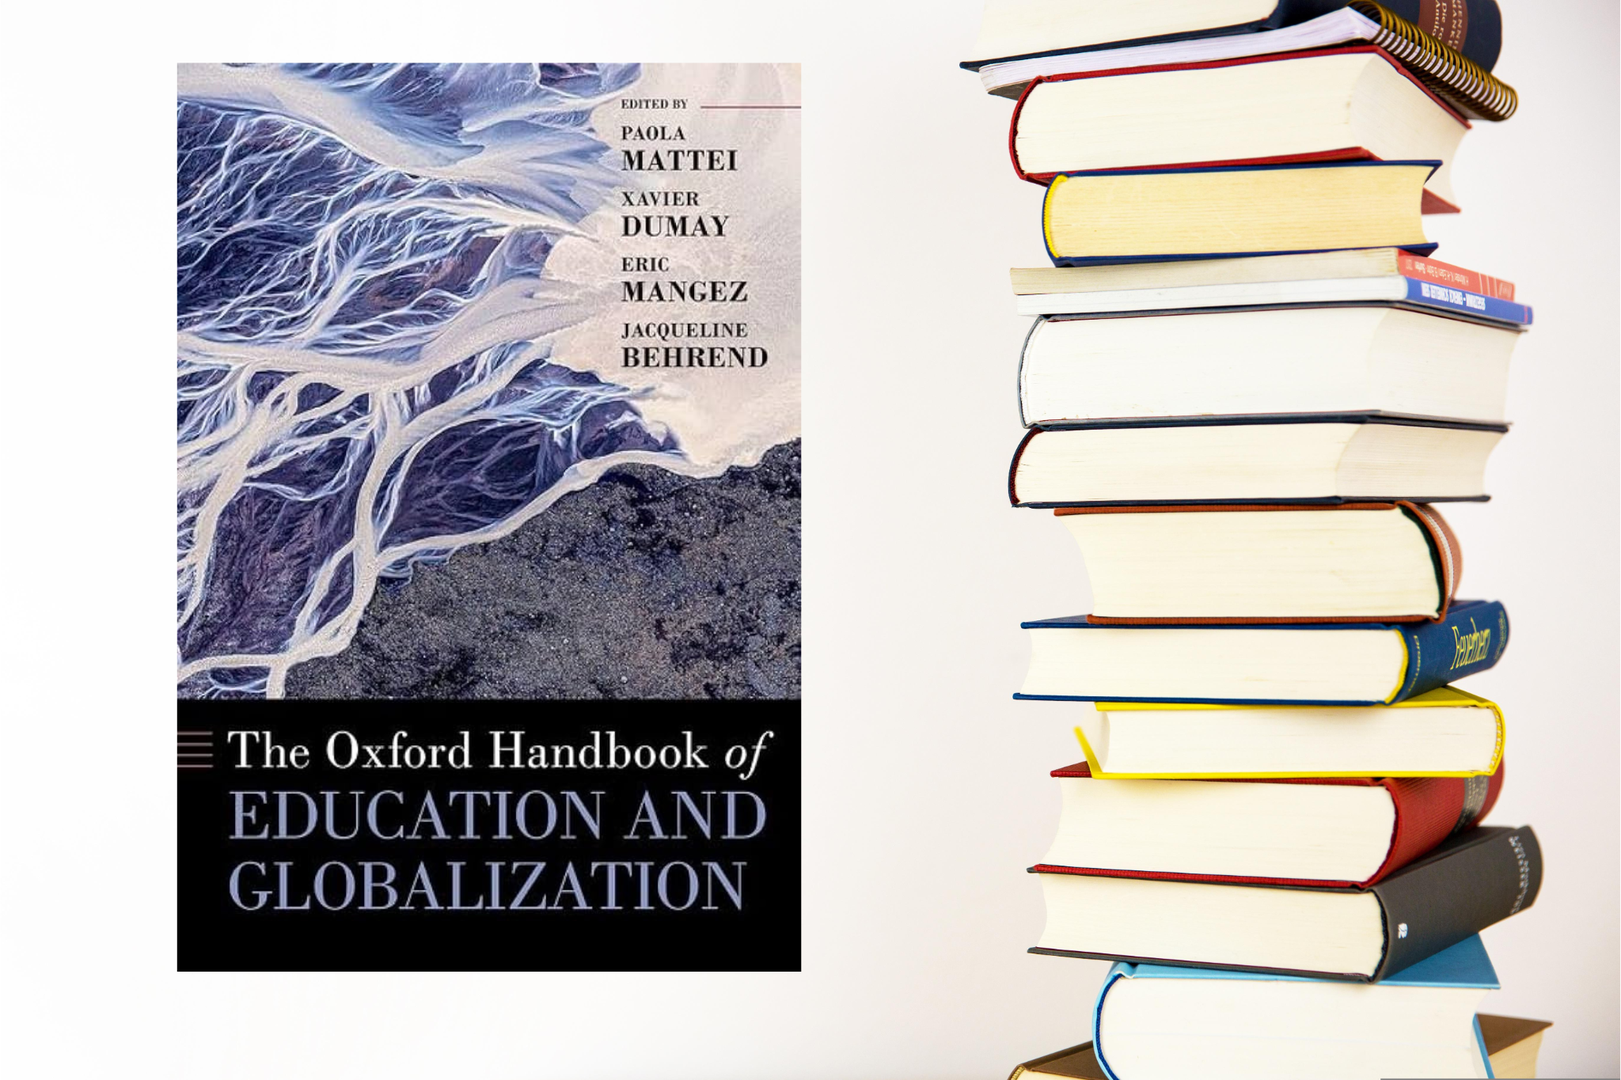 Stichweh, Rudolf. The University as a World Organization. Pp. 424-442 in: Paola Mattei et al. (eds.), The Oxford Handbook of Education and Globalization. Oxford U.P. 2023.